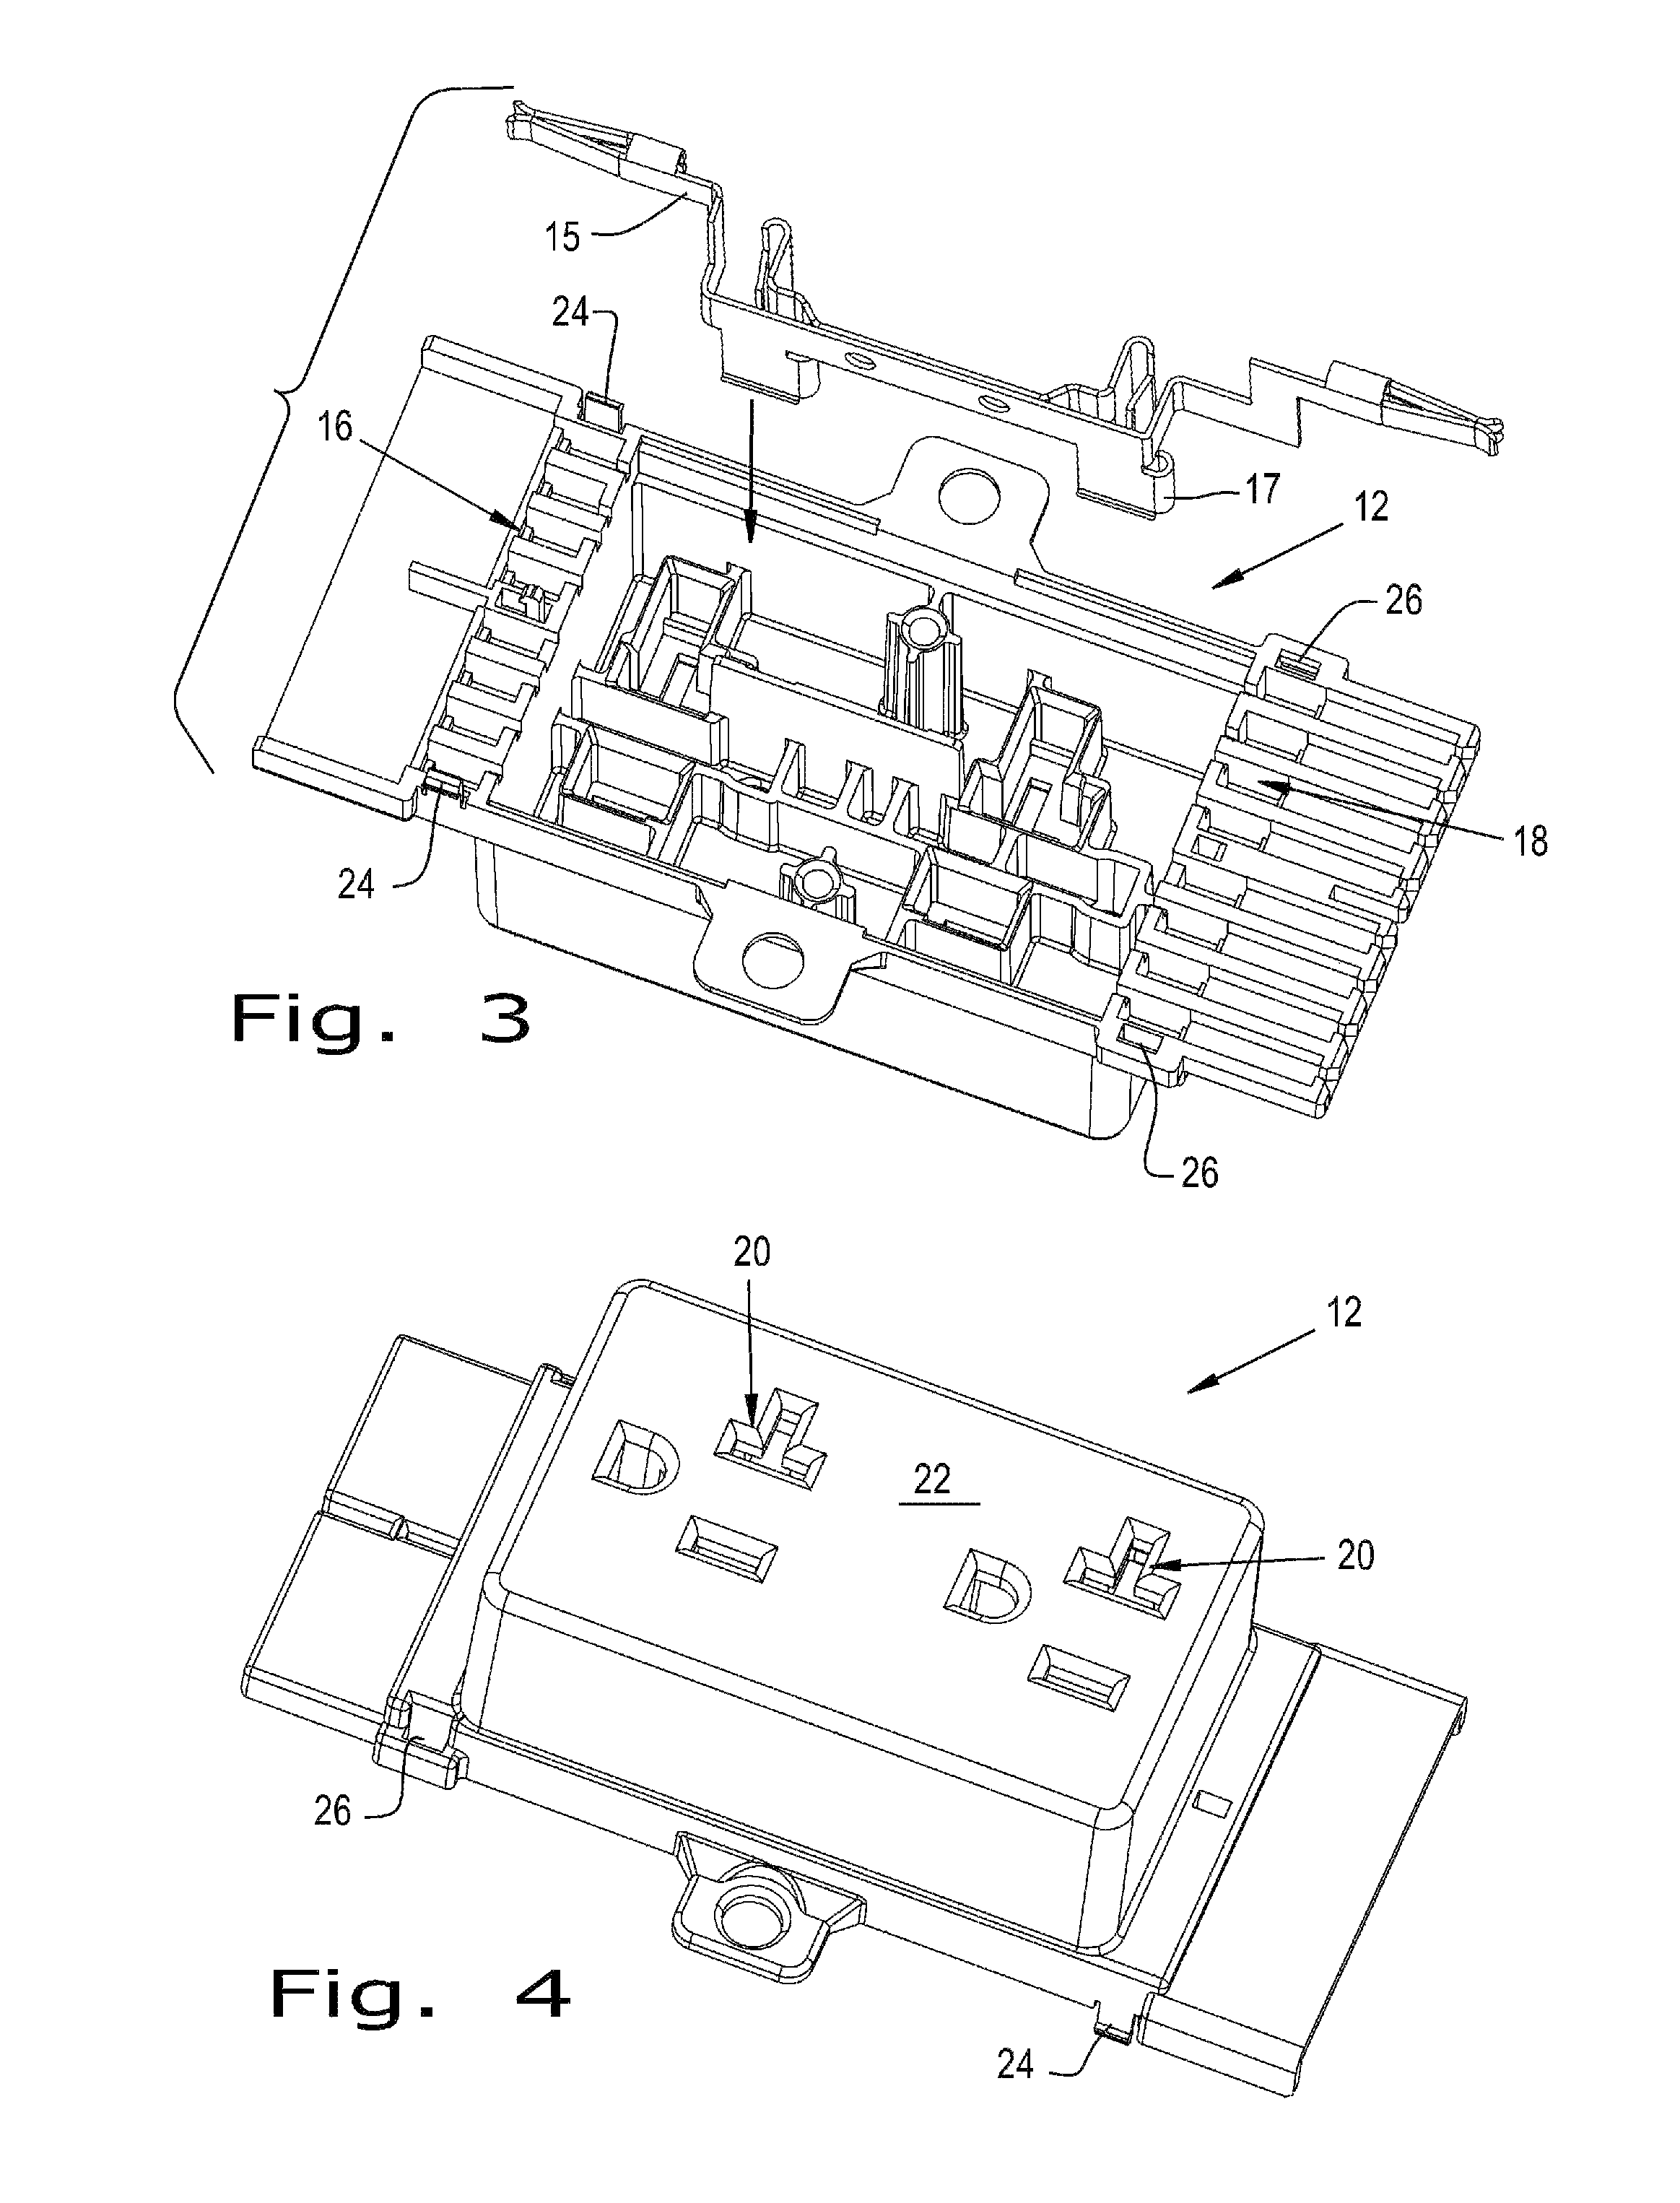 Electrical distribution block apparatus and method of assembly